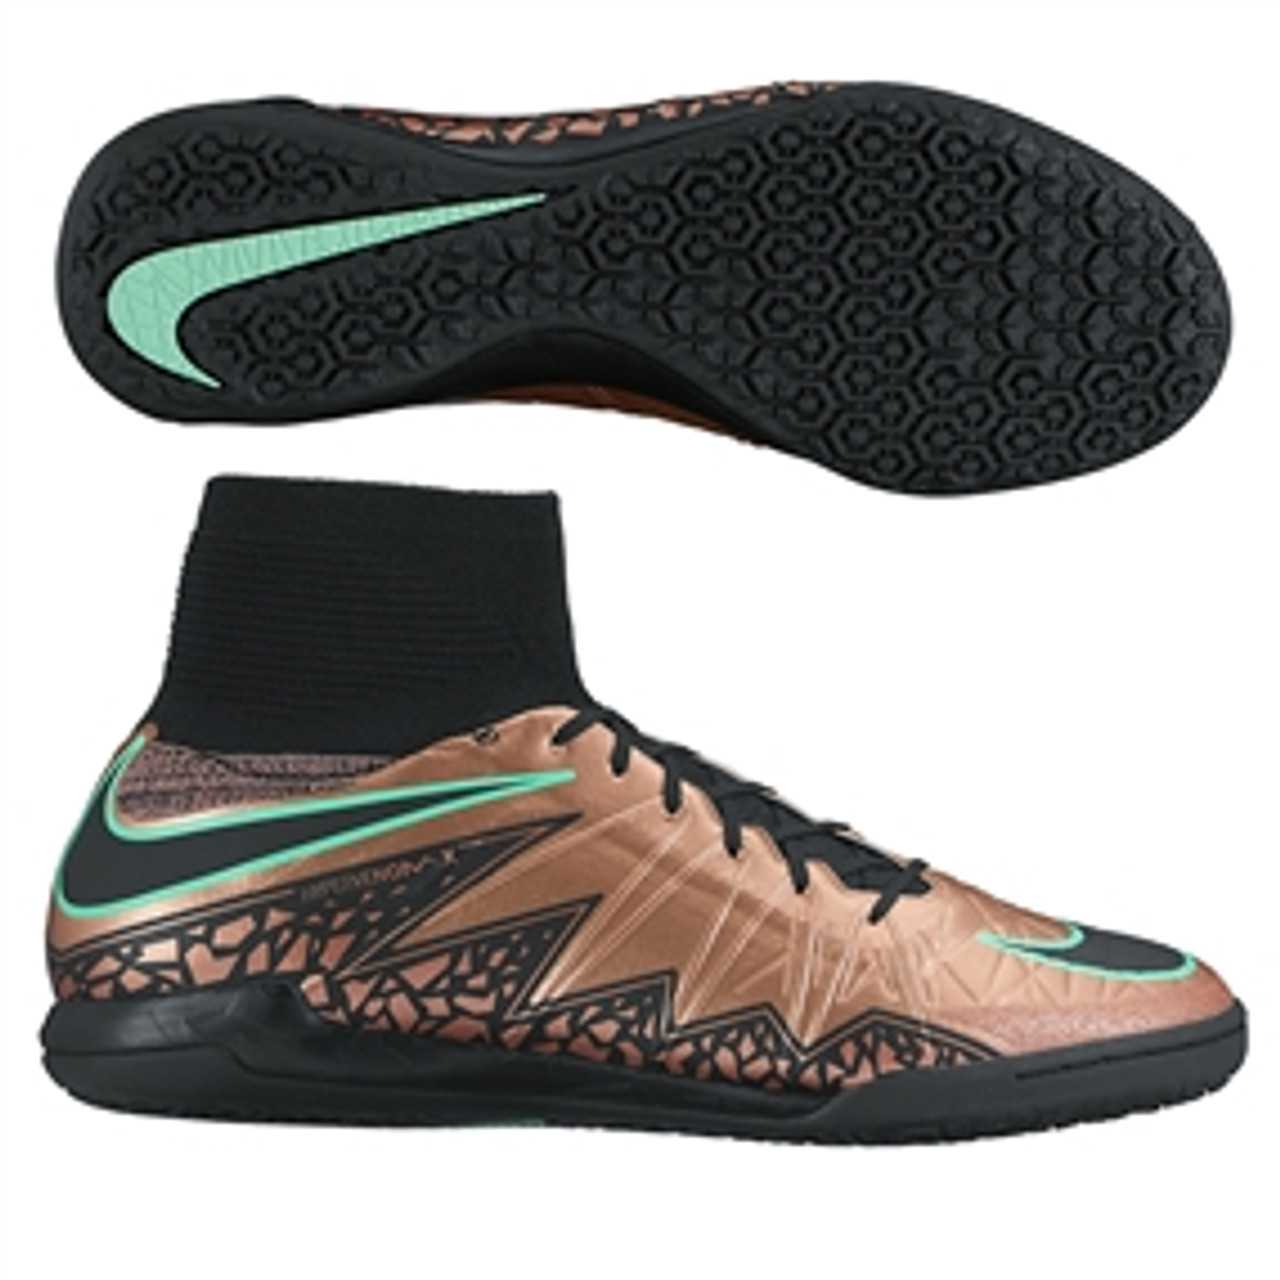 nike hypervenomx proximo ii dynamic fit indoor soccer shoes